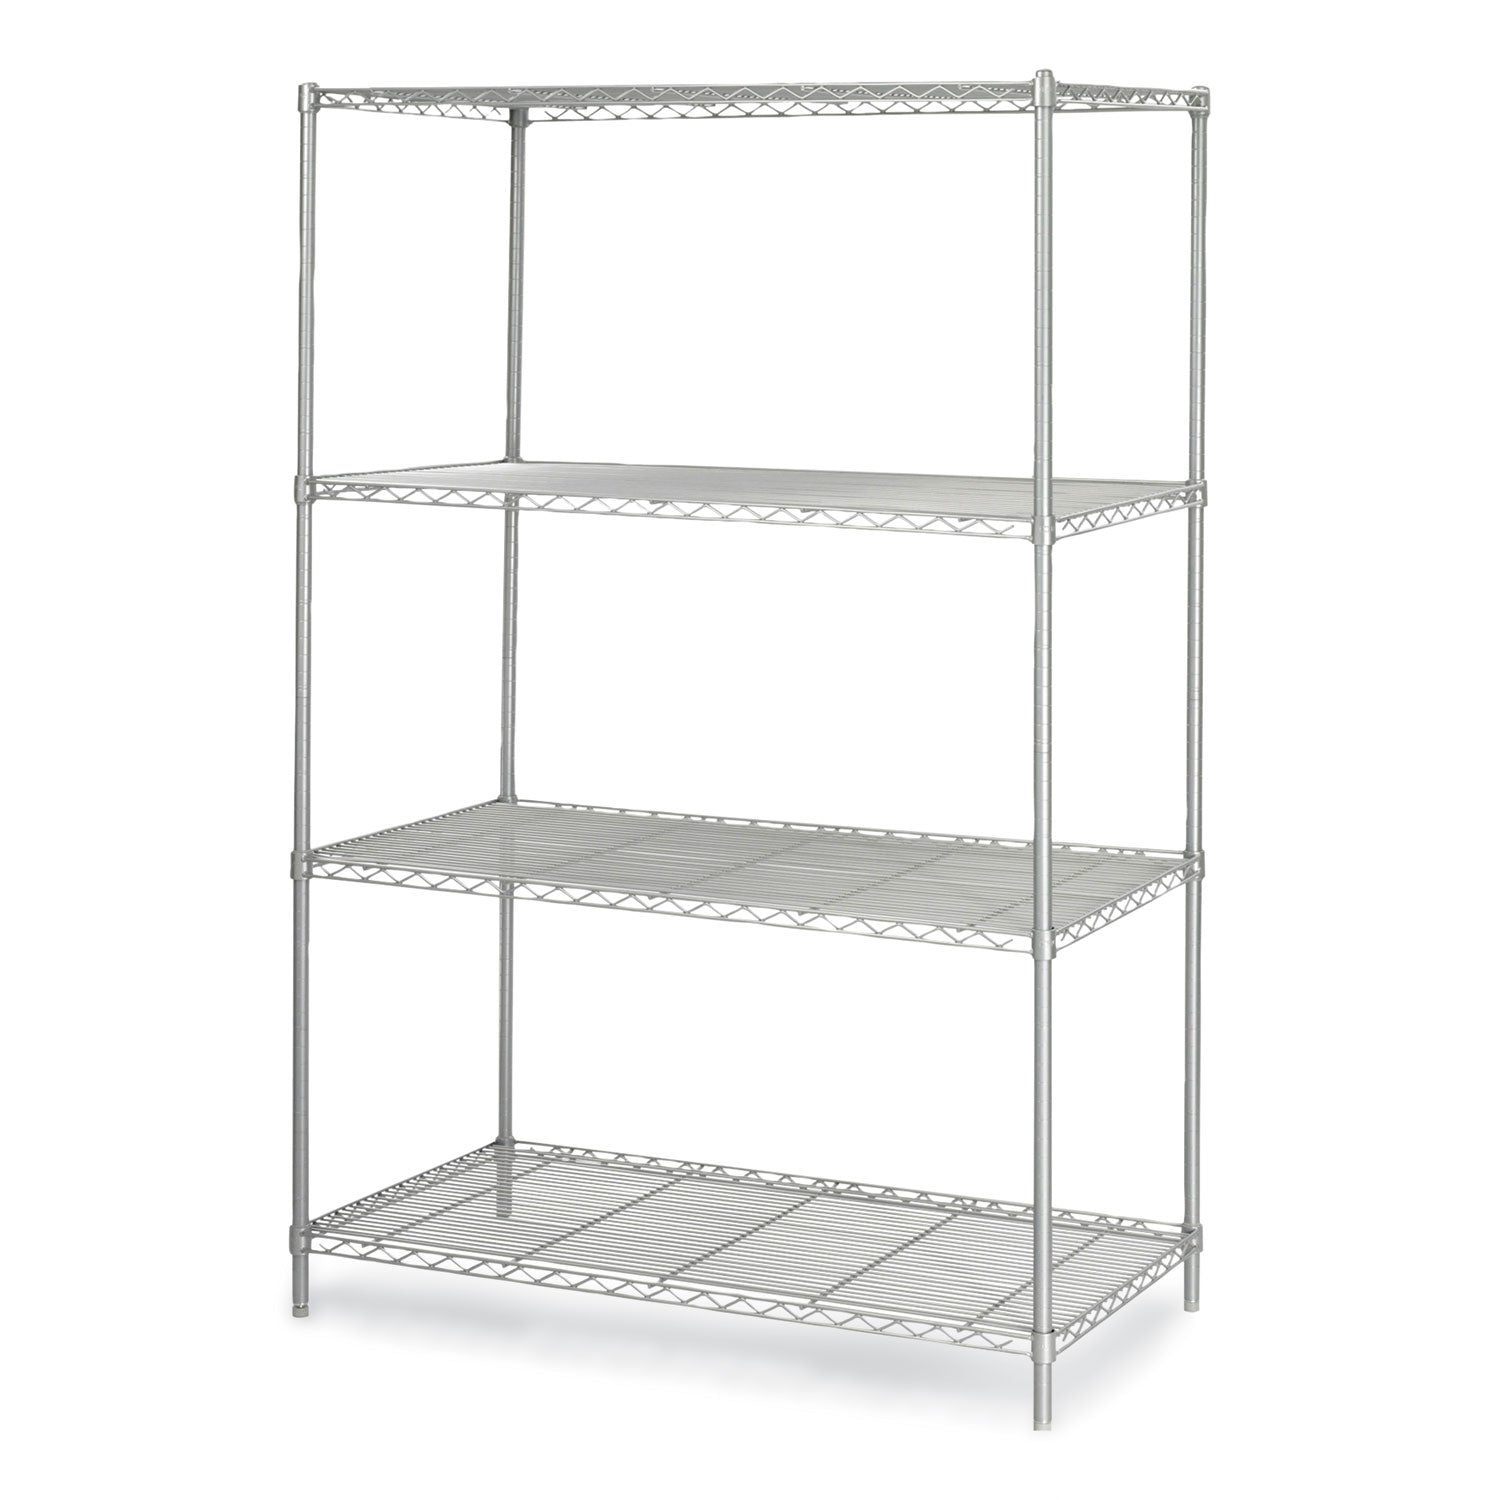 industrial-wire-shelving-four-shelf-48w-x-24d-x-72h-metallic-gray-ships-in-1-3-business-days_saf5294gr - 1